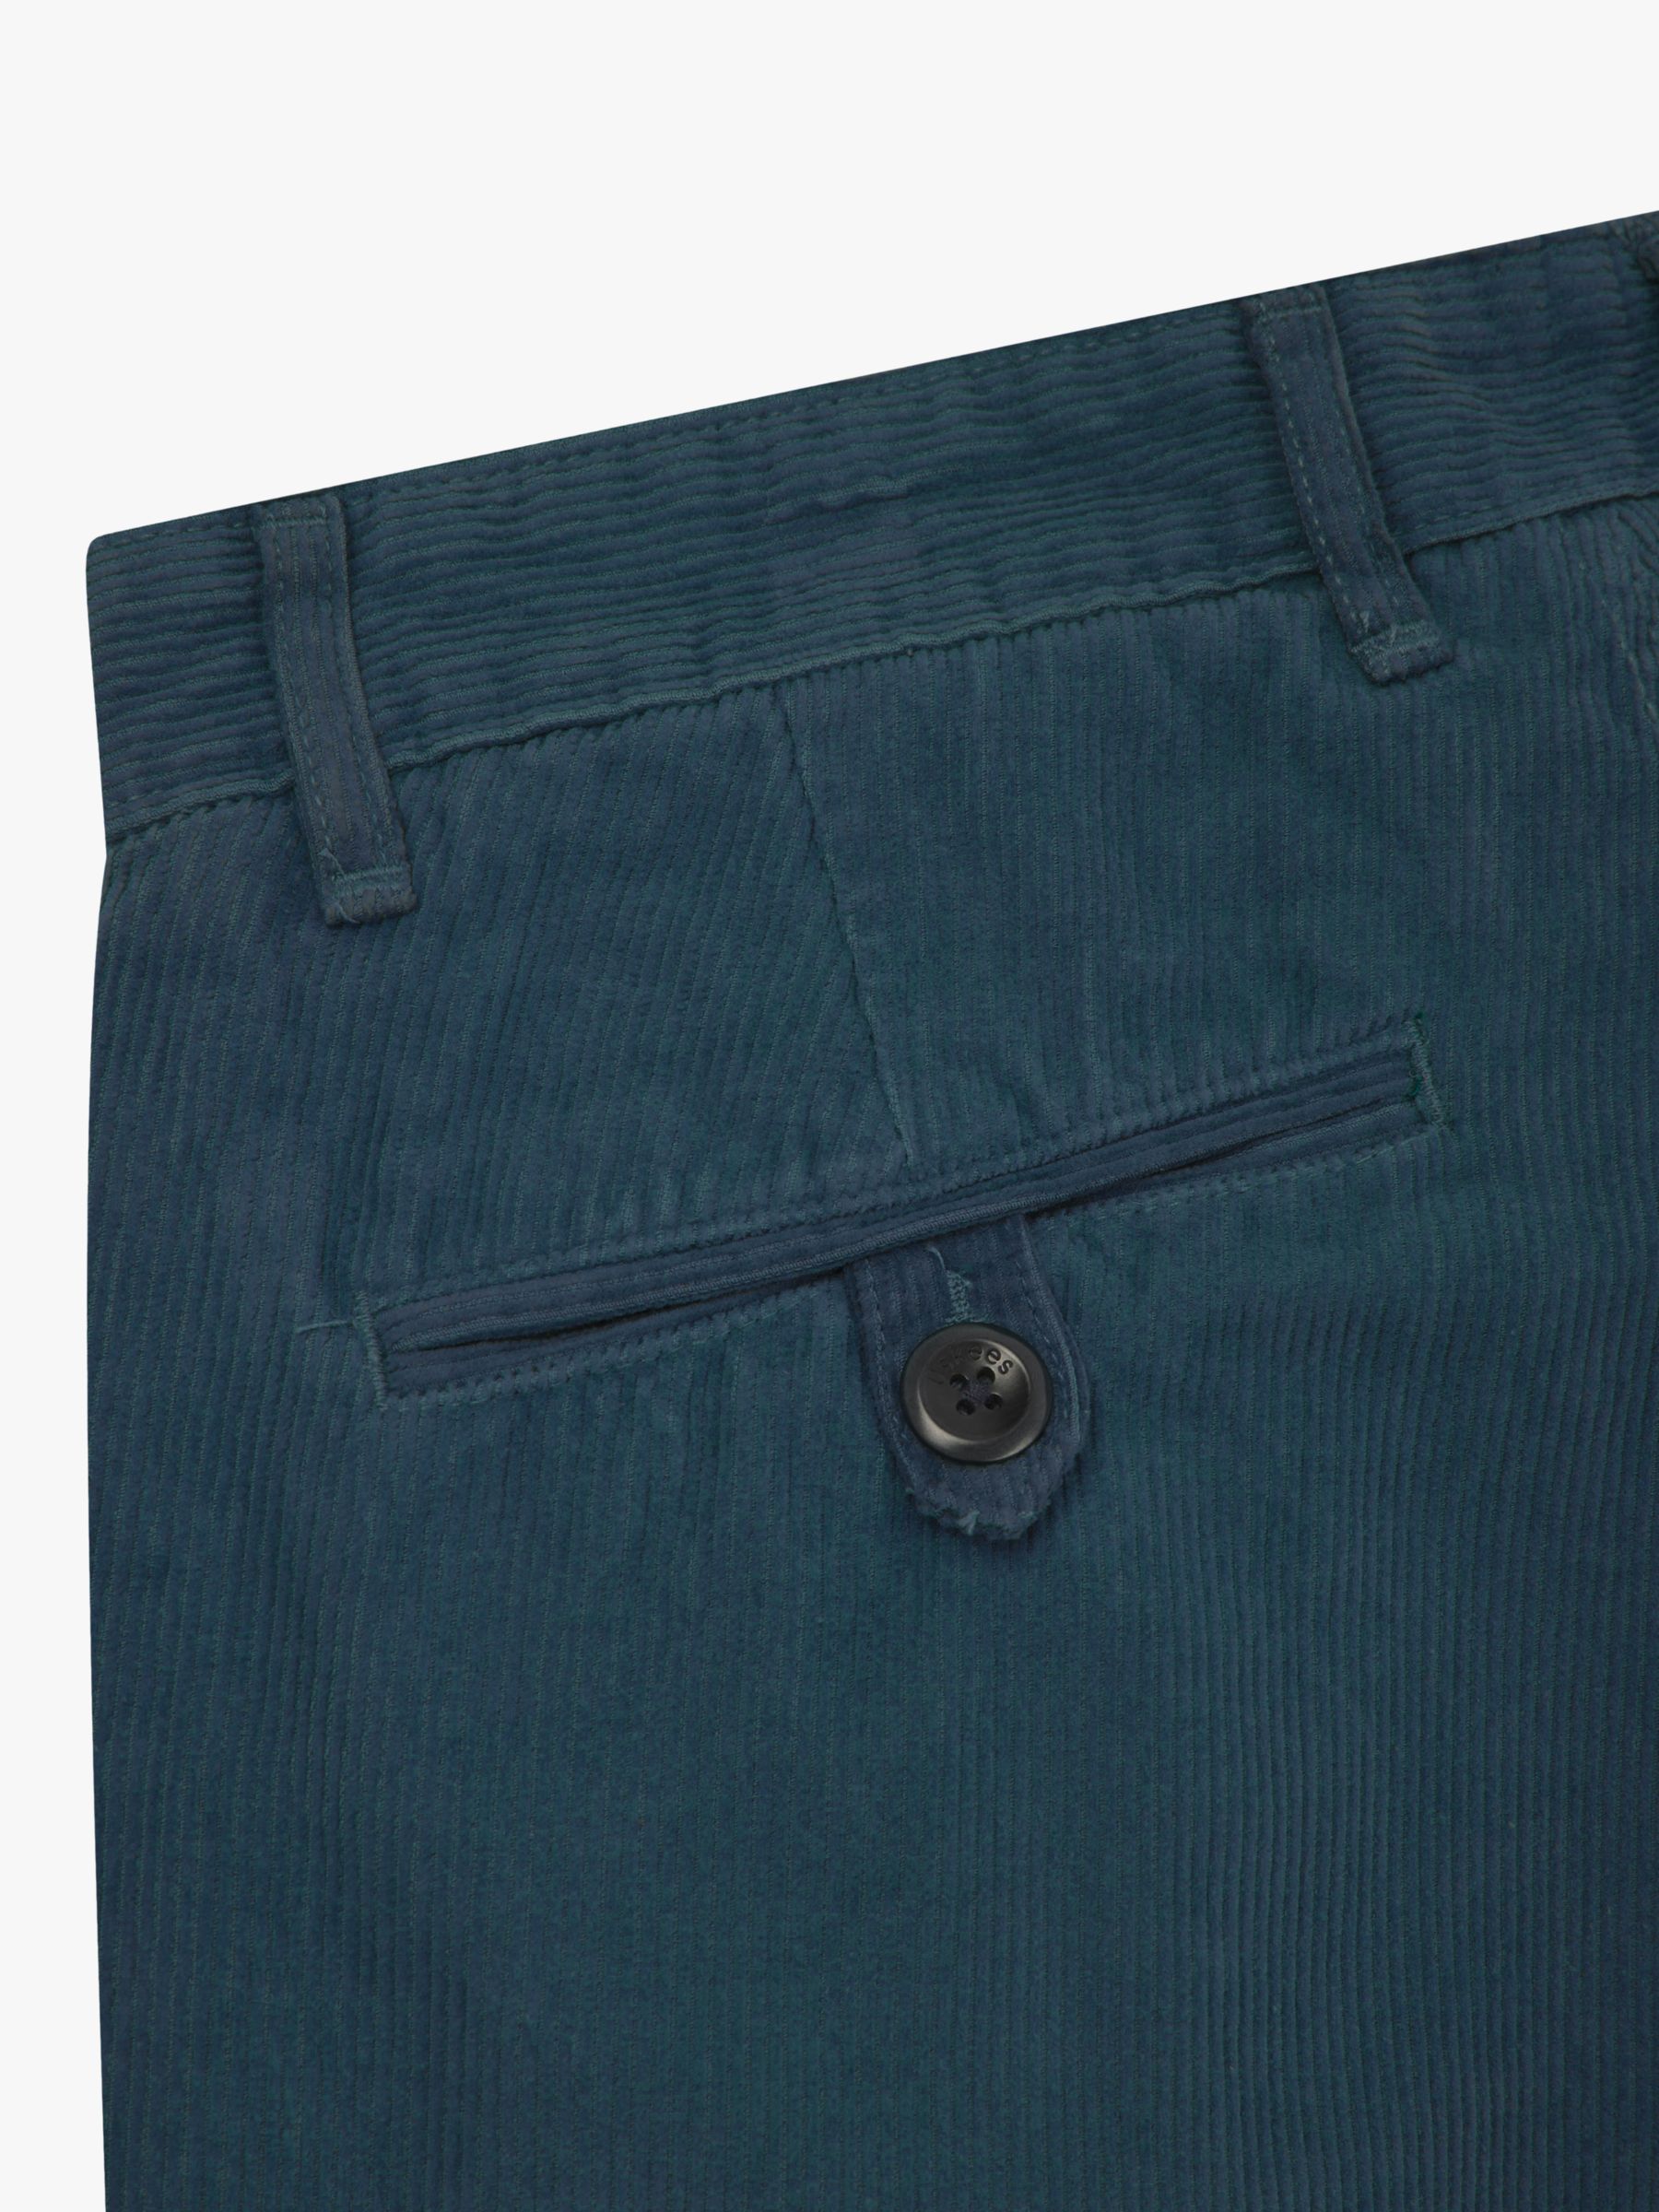 Buy Uskees Retro Boat Trousers, Blue Online at johnlewis.com